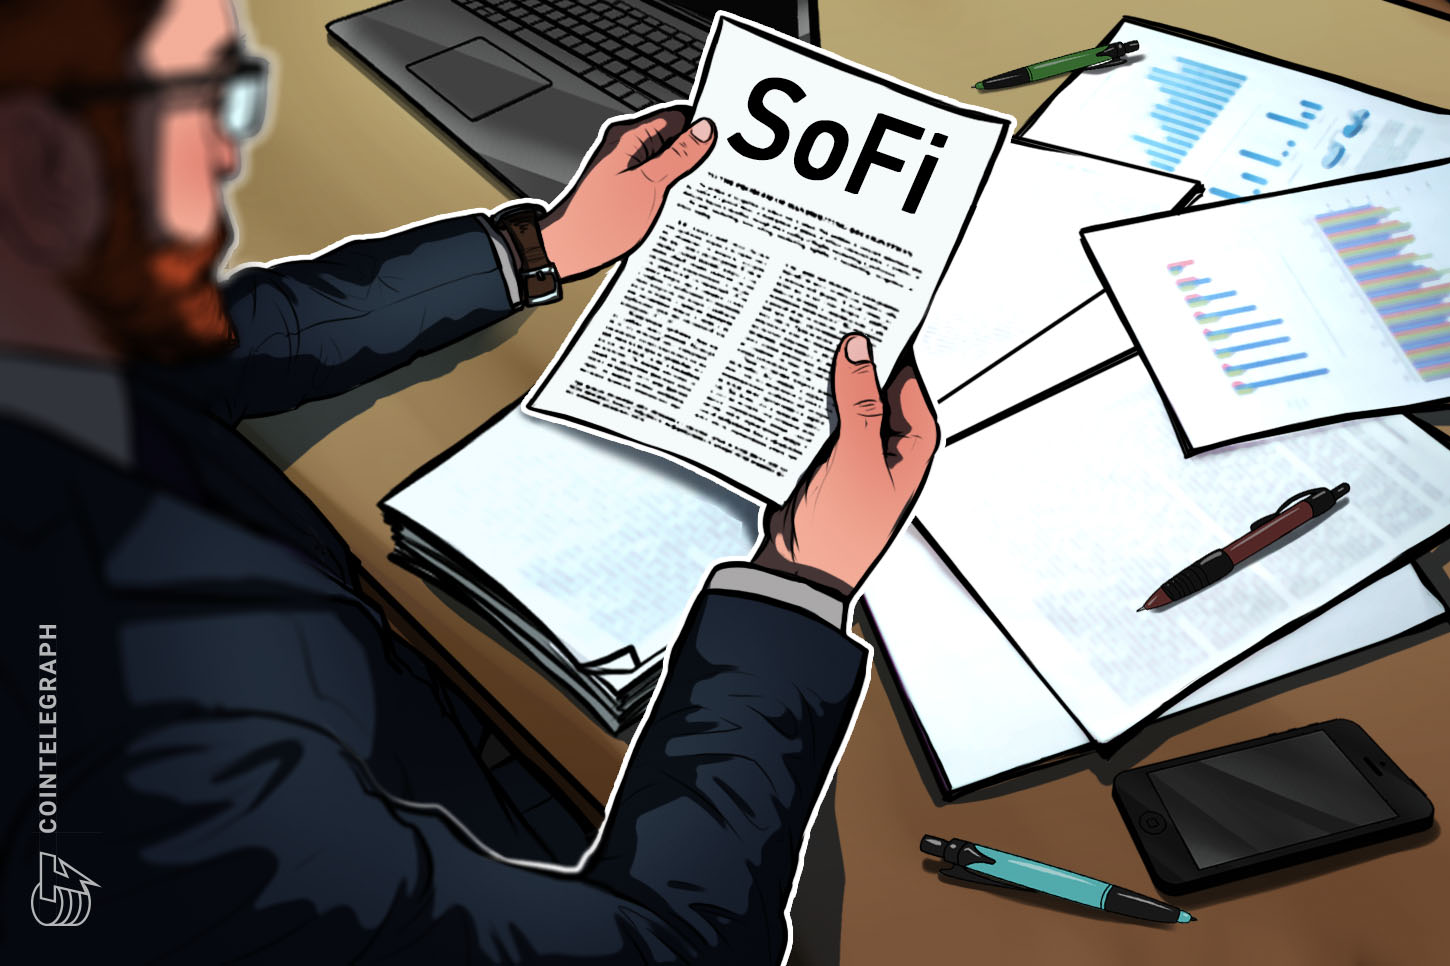 Mortgage refinancer and BitLiscensee SoFi is obvious to launch a nationwide financial institution within the US